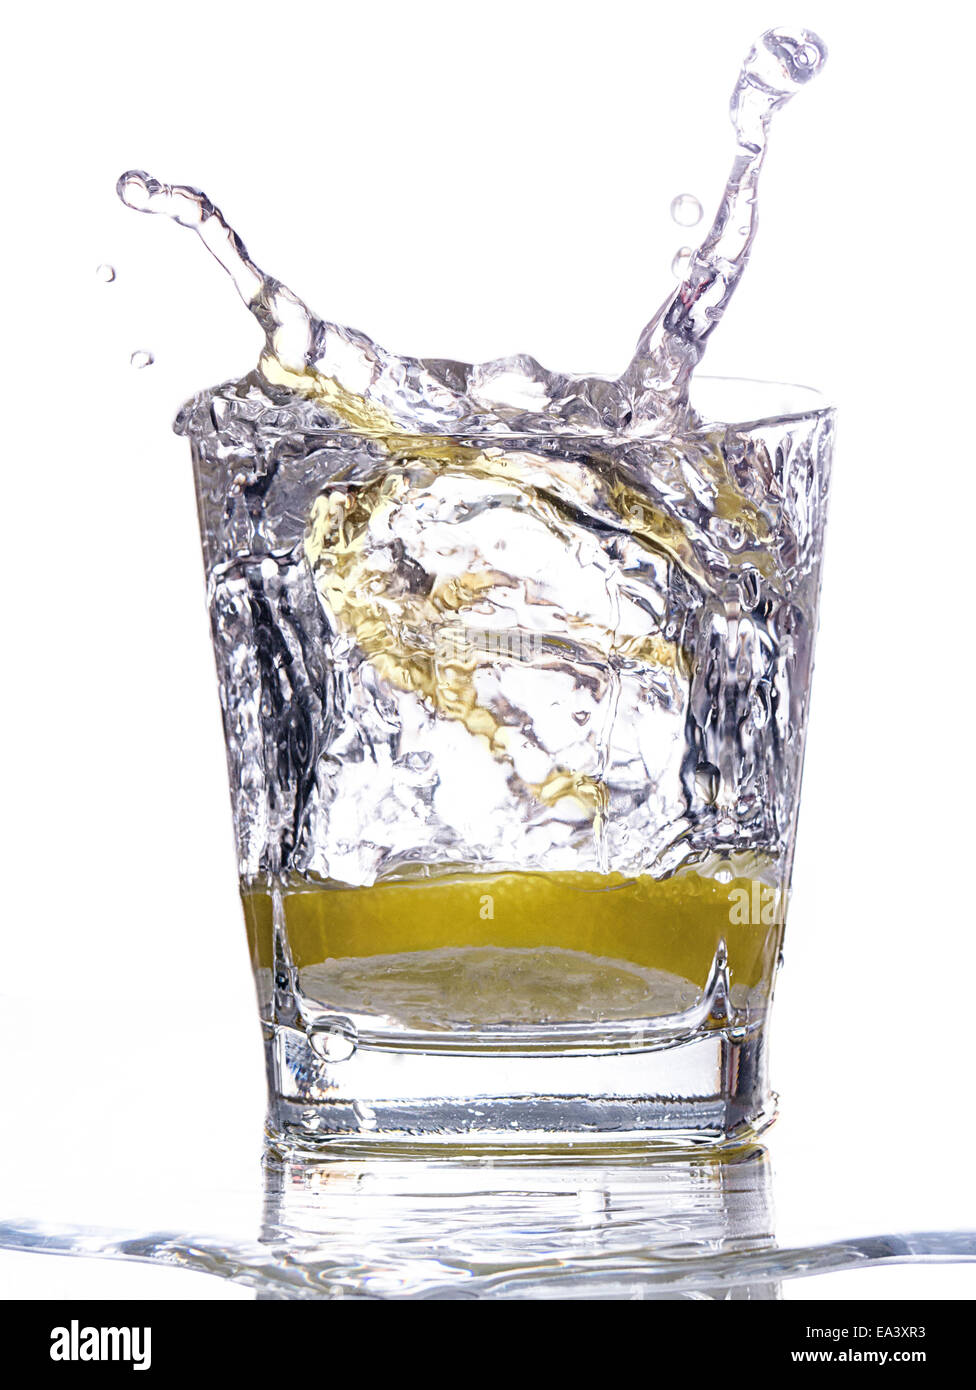 A lemon slice falls in a glass of water Stock Photo